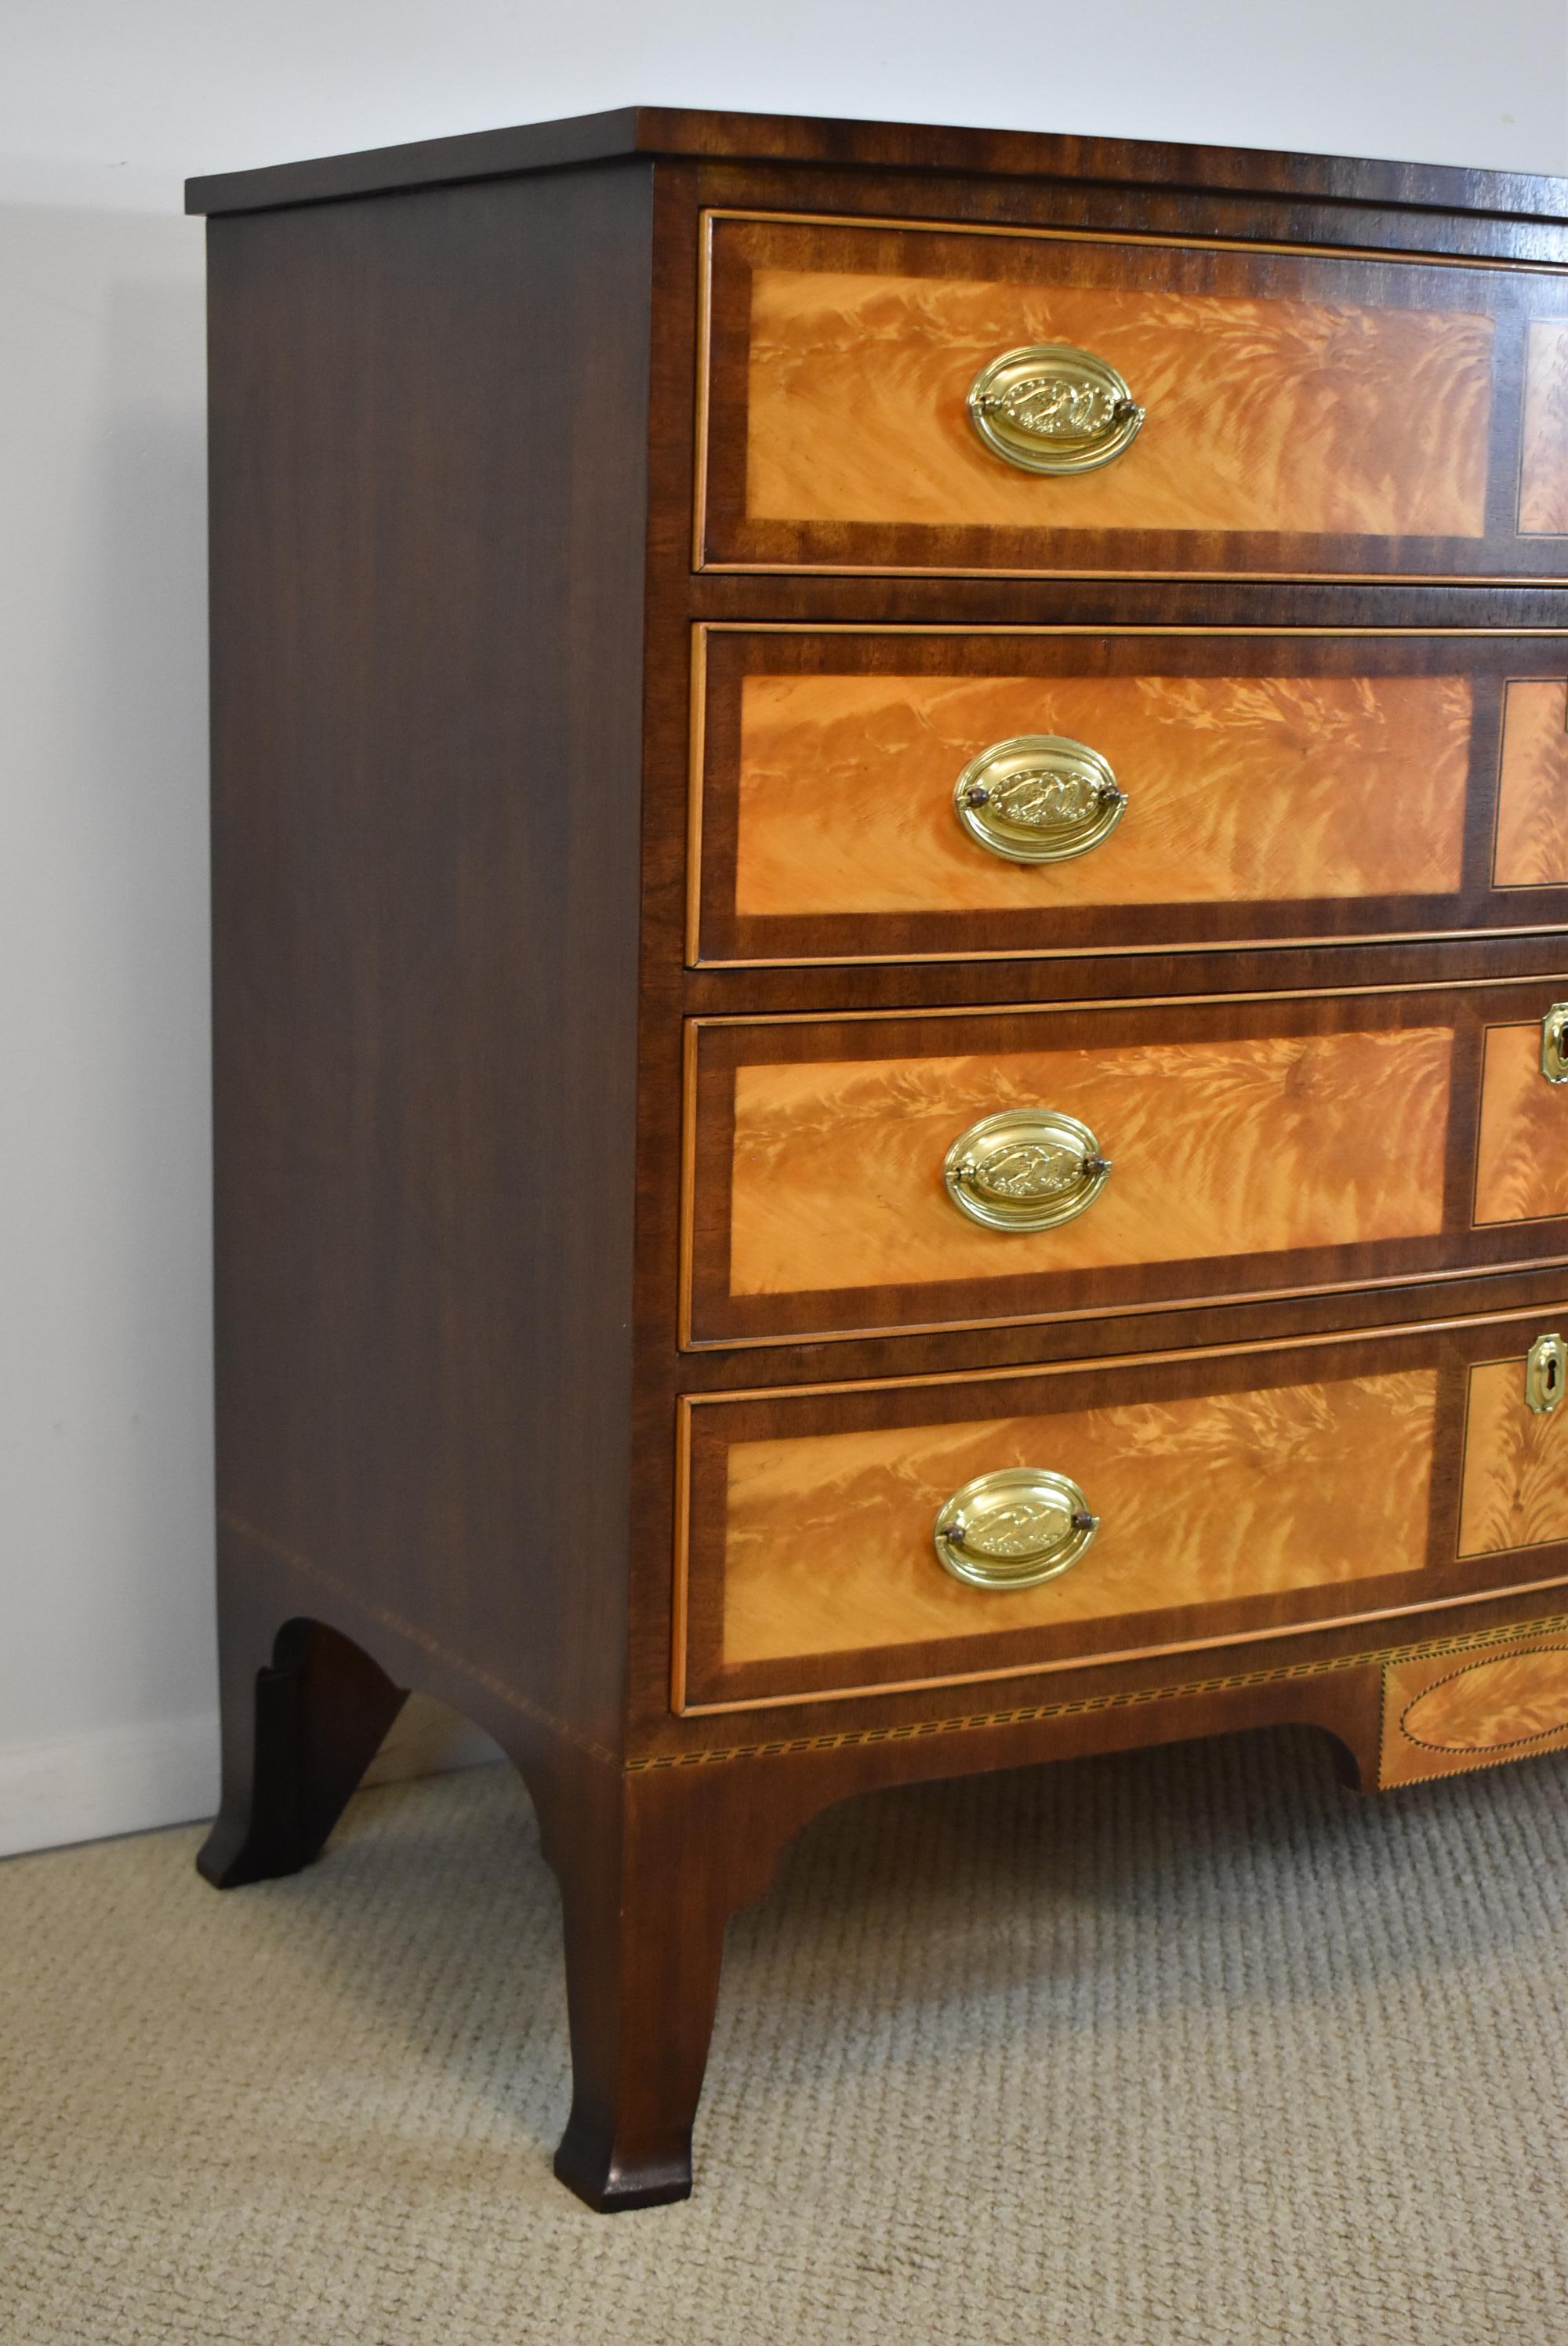 Henkel Harris Rogers chest, bow front, with mahogany and satinwood banded drawers. #2410. This chest is a rare find and is in great condition. It has 4 drawers and brass oval hardware with eagles. Happlewhite French splayed feet. Minor surface wear